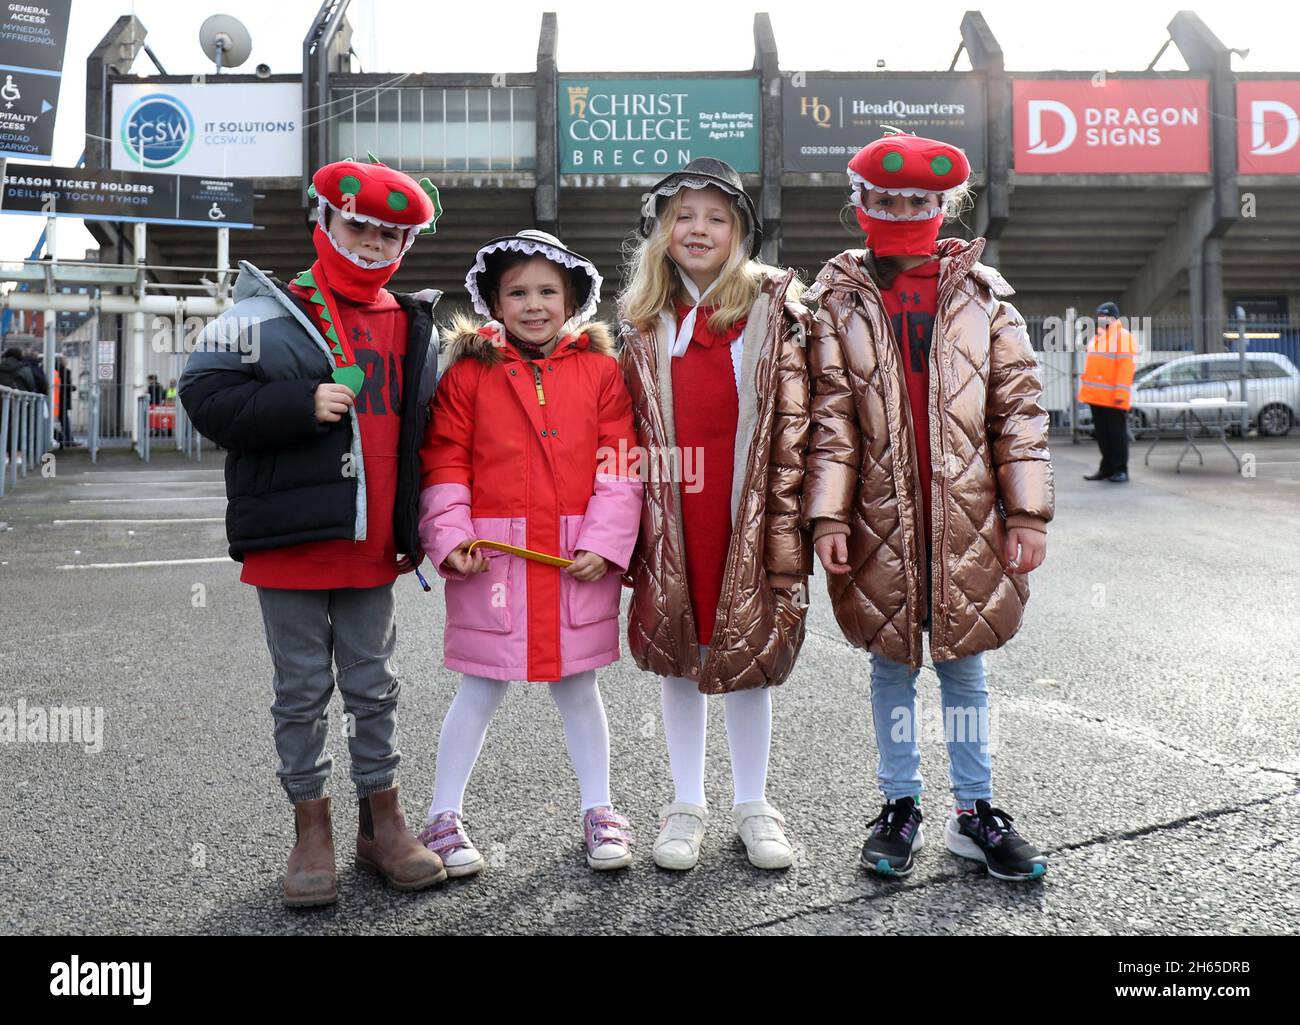 Young Wales fans arriving before the Autumn International match at Cardiff Arms park, Cardiff. Picture date: Saturday November 13, 2021. See PA story RUGBYU Wales Women. Photo credit should read: Bradley Collyer/PA Wire. RESTRICTIONS: Use subject to restrictions. Editorial use only, no commercial use without prior consent from rights holder. Stock Photo